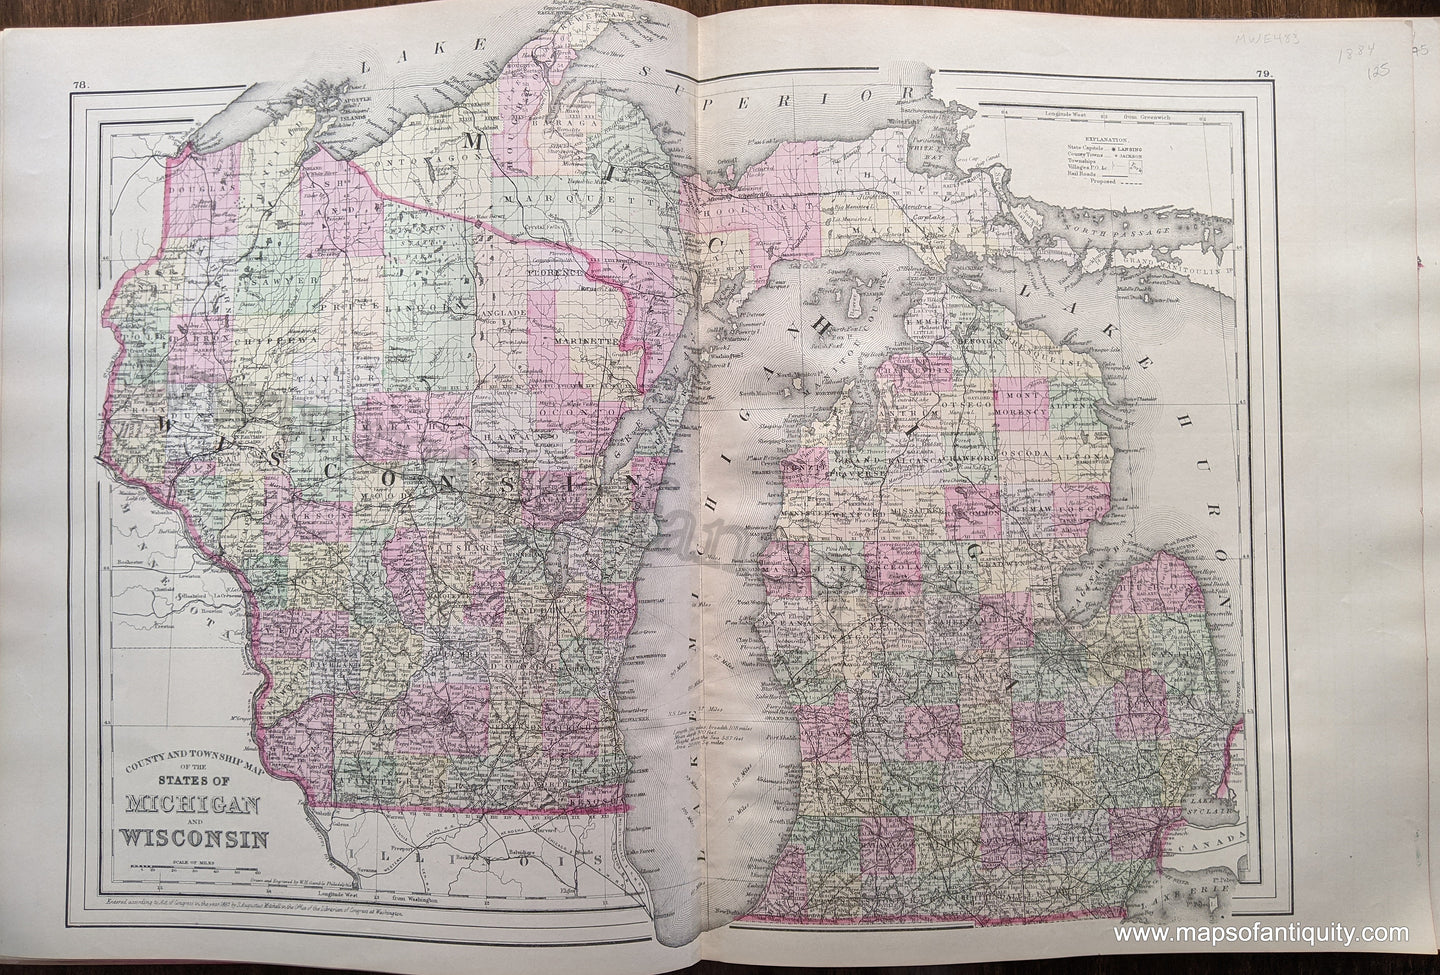 Antique-Hand-Colored-Map-Double-sided-sheet-with-multiple-maps:-Centerfold---County-and-Township-Map-of-the-States-of-Michigan-and-Wisconsin;-versos:-Plan-of-Milwaukee-/-Plan-of-the-City-of-Detroit-United-States-Midwest-1884-Mitchell-Maps-Of-Antiquity-1800s-19th-century